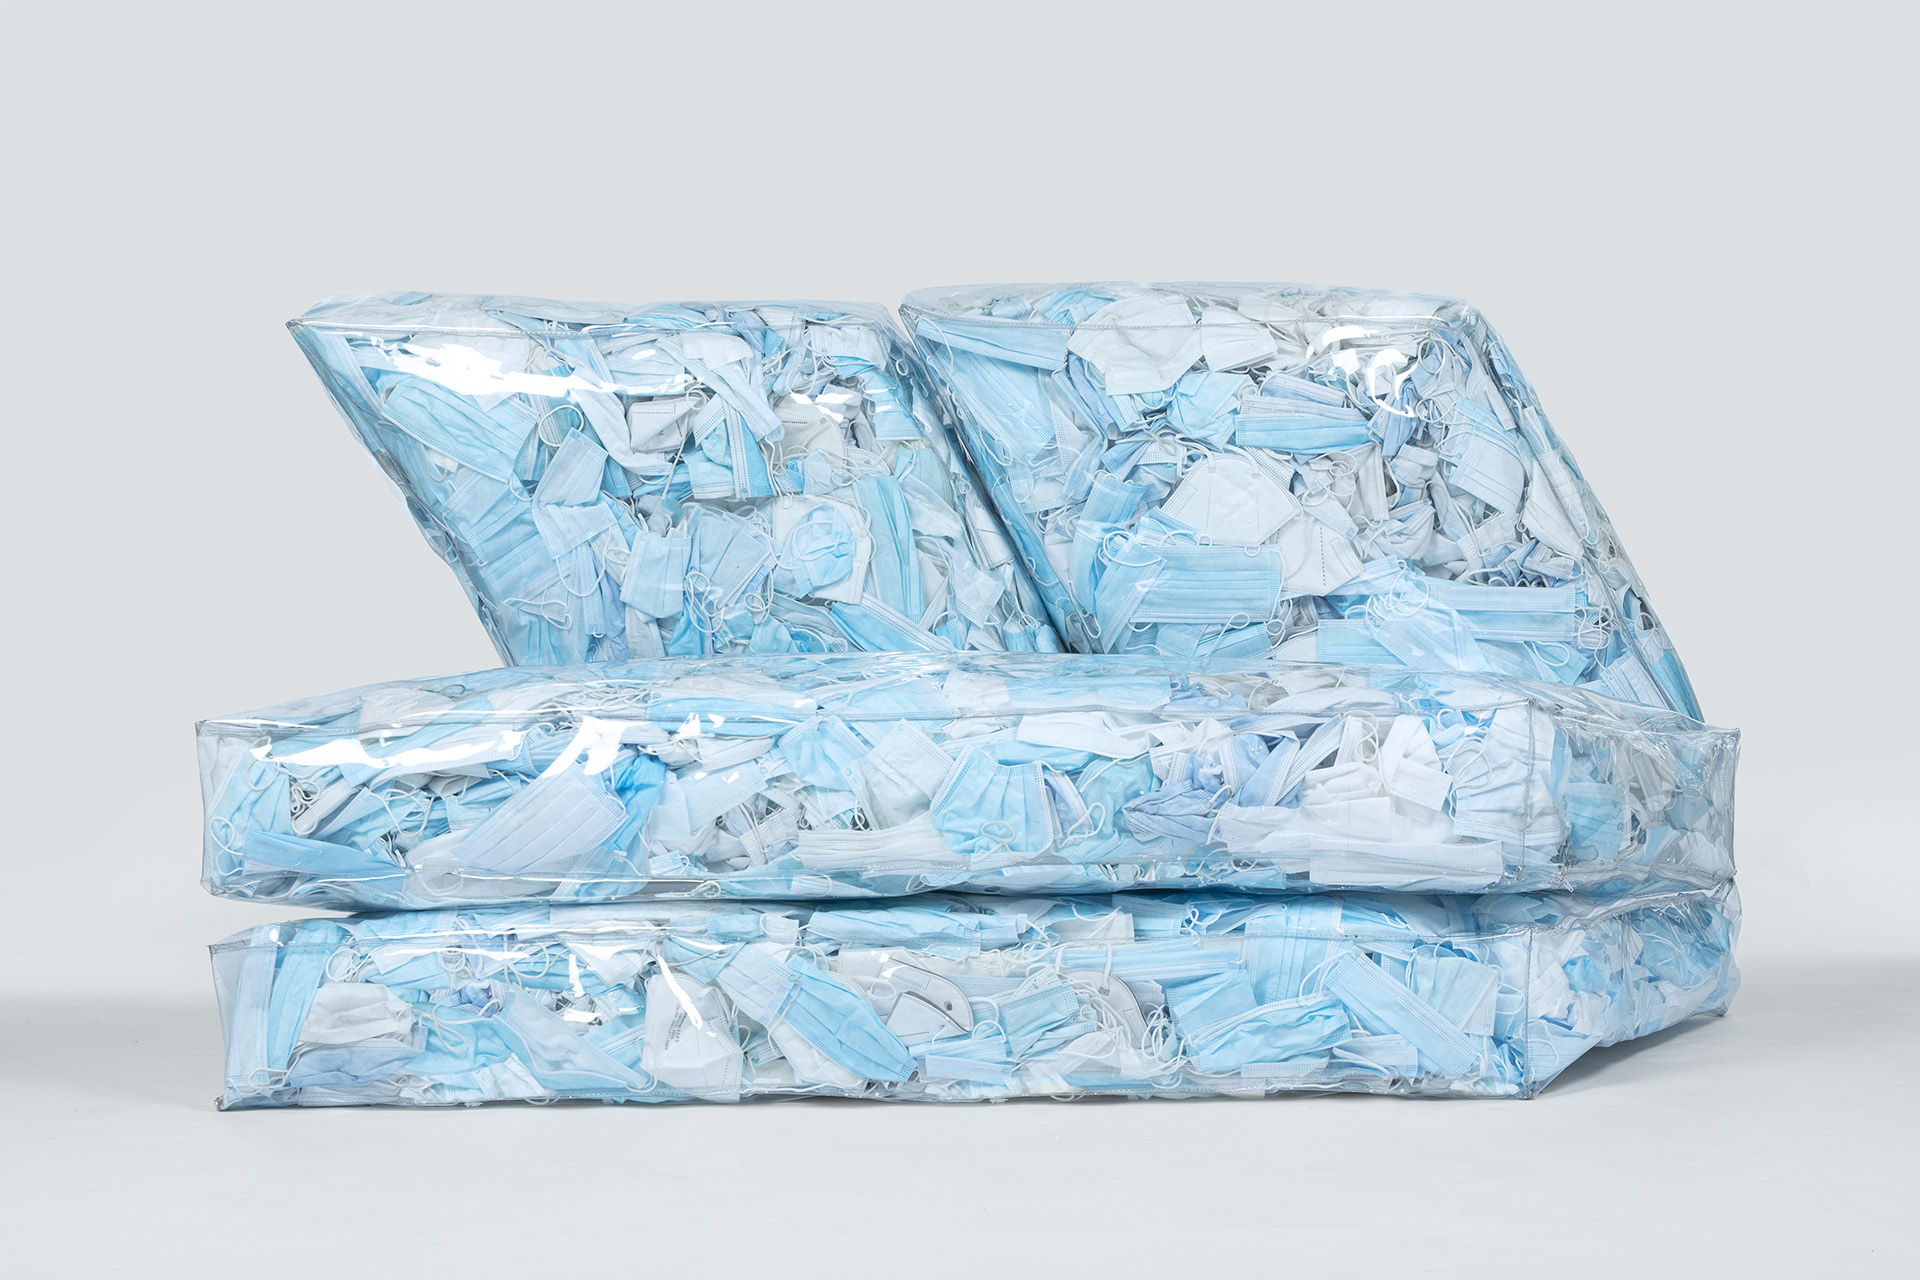 Modular pouf in the shape of an iceberg. New life to disposable masks reco-vered from the streets